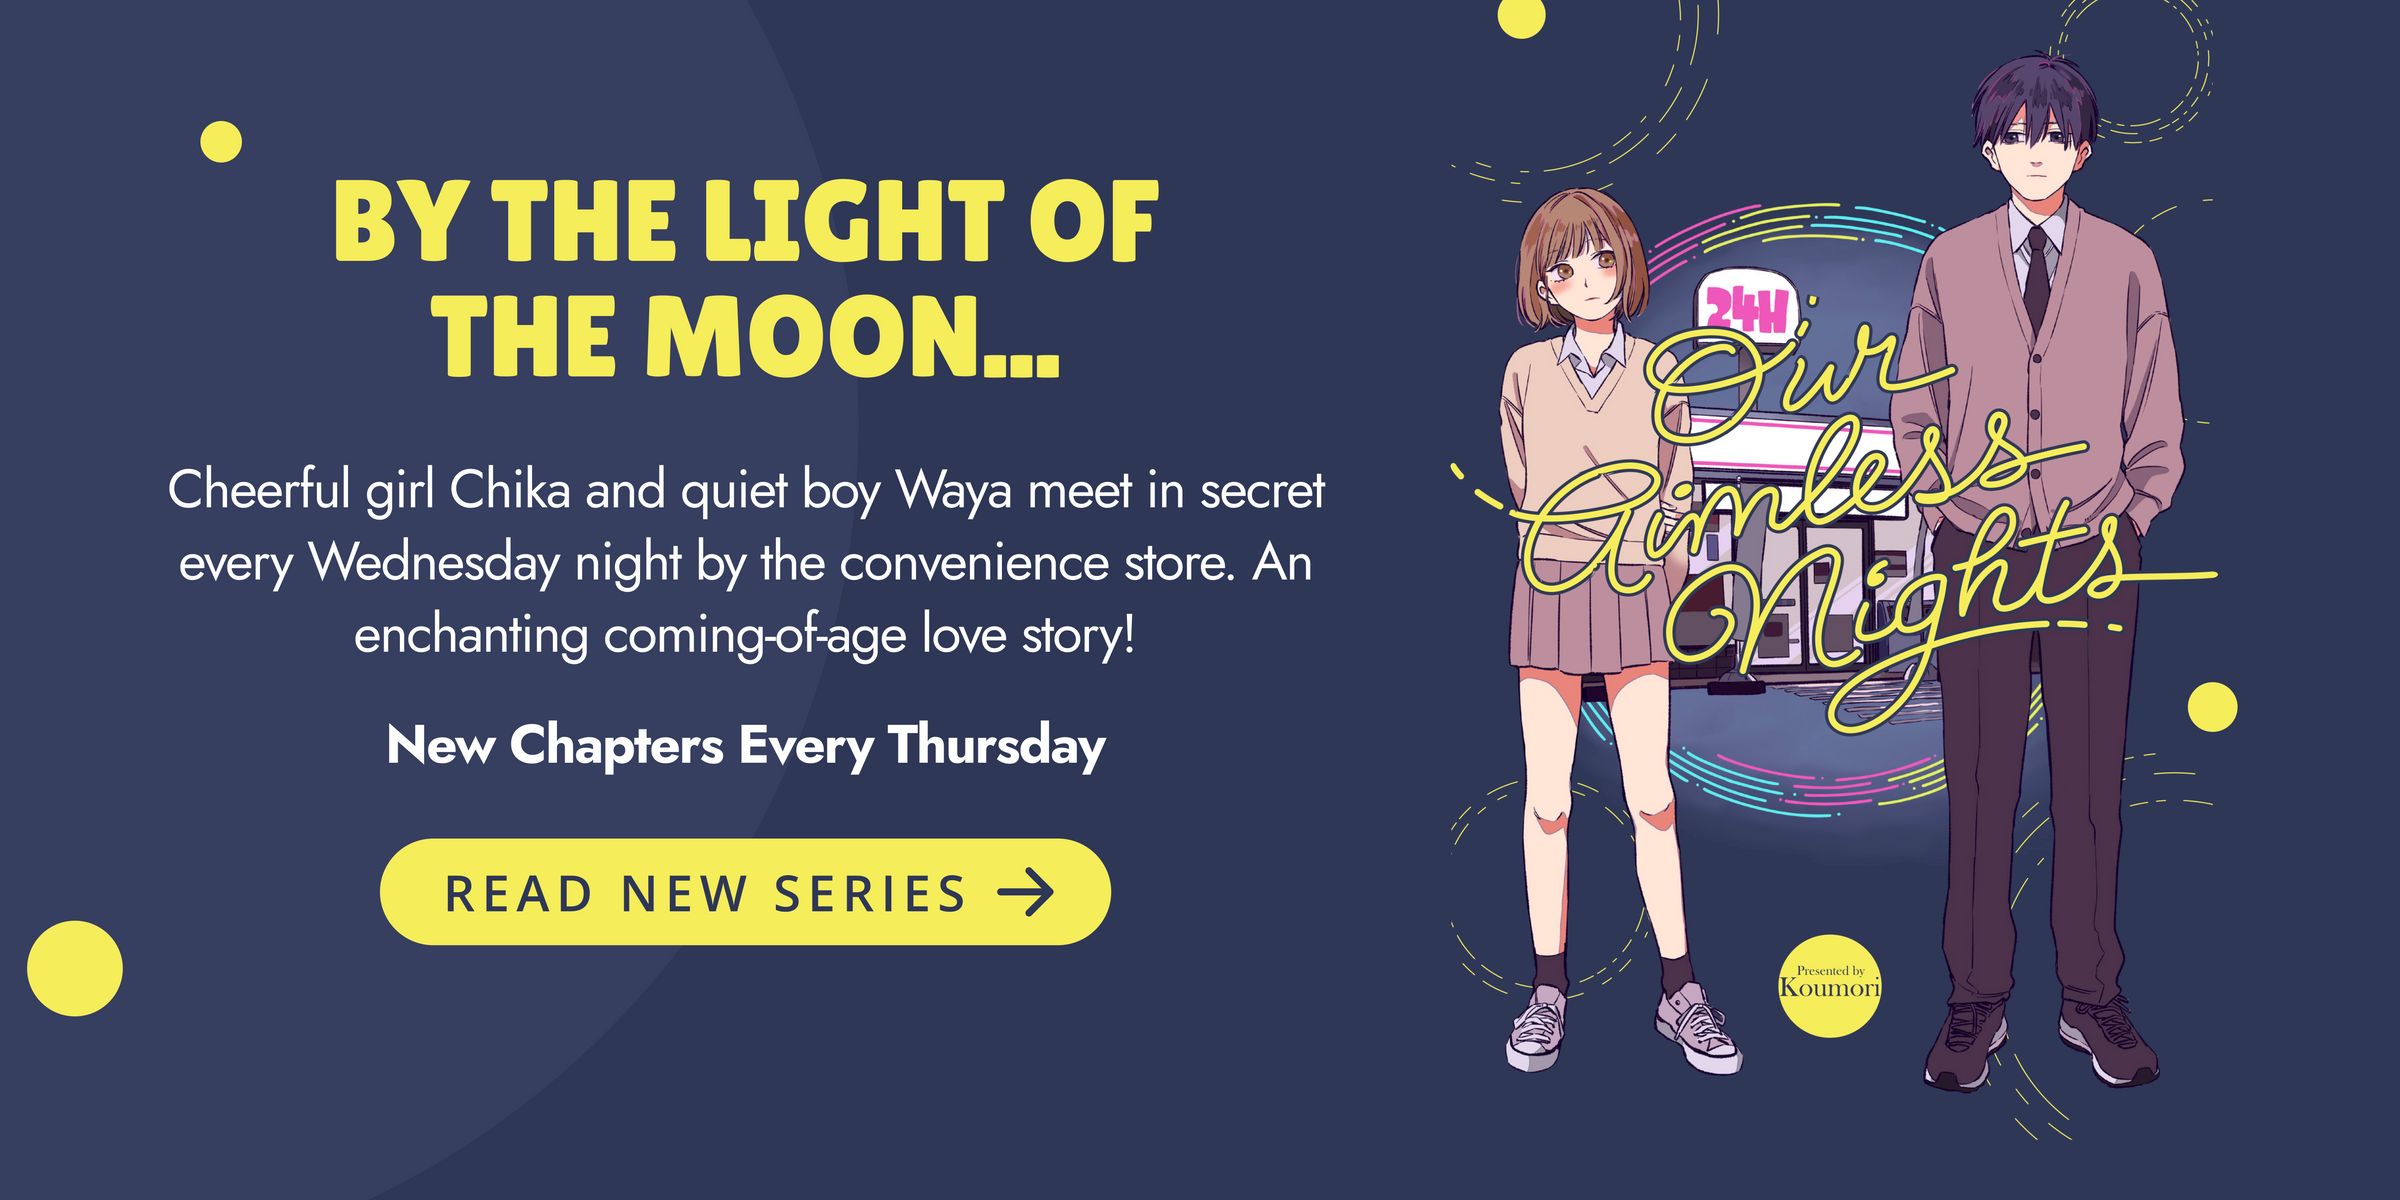 By the light of the moon... Cheerful girl Chika and quiet boy Waya meet in secret every Wednesday night by the convenience store. An enchanting coming-of-age love story! Our Aimless Nights. New chapters every Thursday. Read New Series.